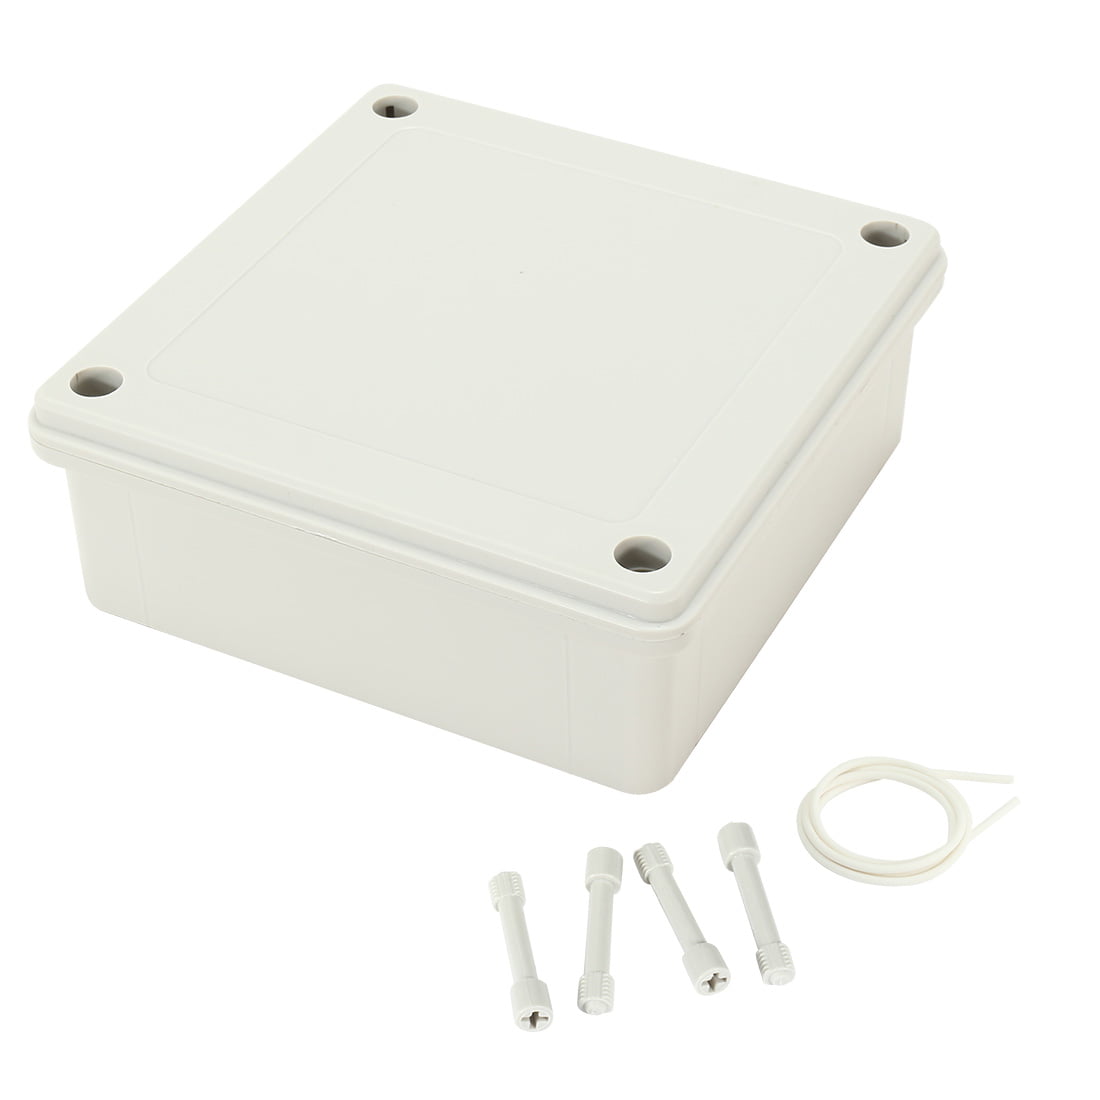 Details about   Waterproof ABS Electric Project Case Junction Box 150x100x70mm Enclosure Case US 